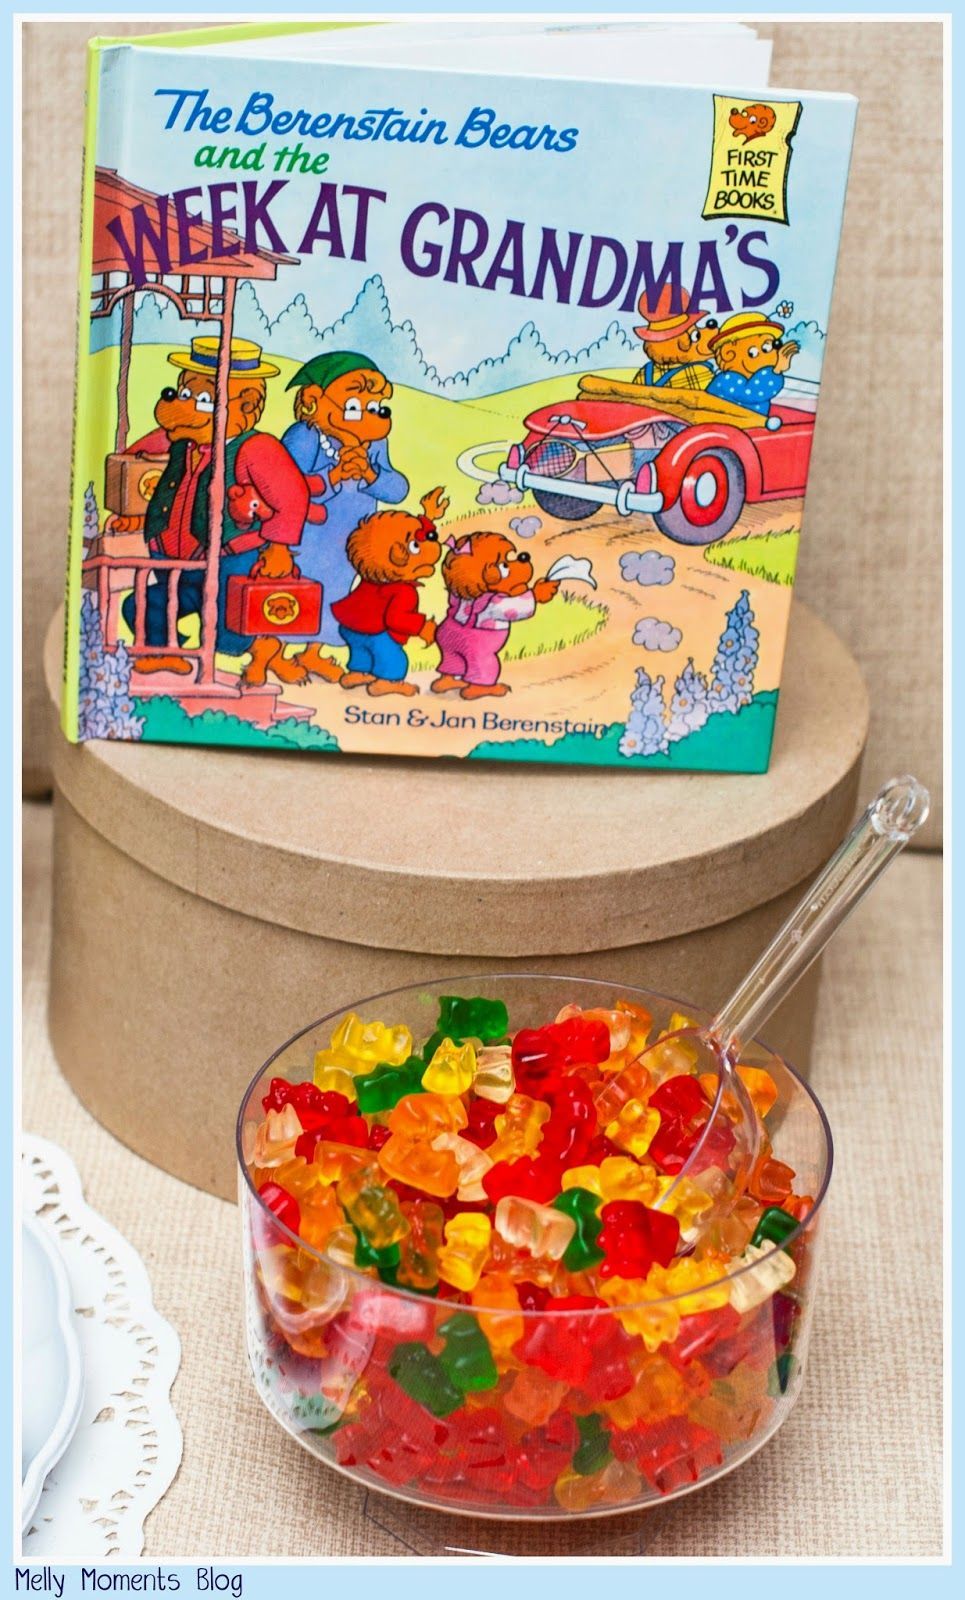 A Storybook Themed Baby Shower… The Berenstein Bears, and many other favorites, help create this gender neutral party! It